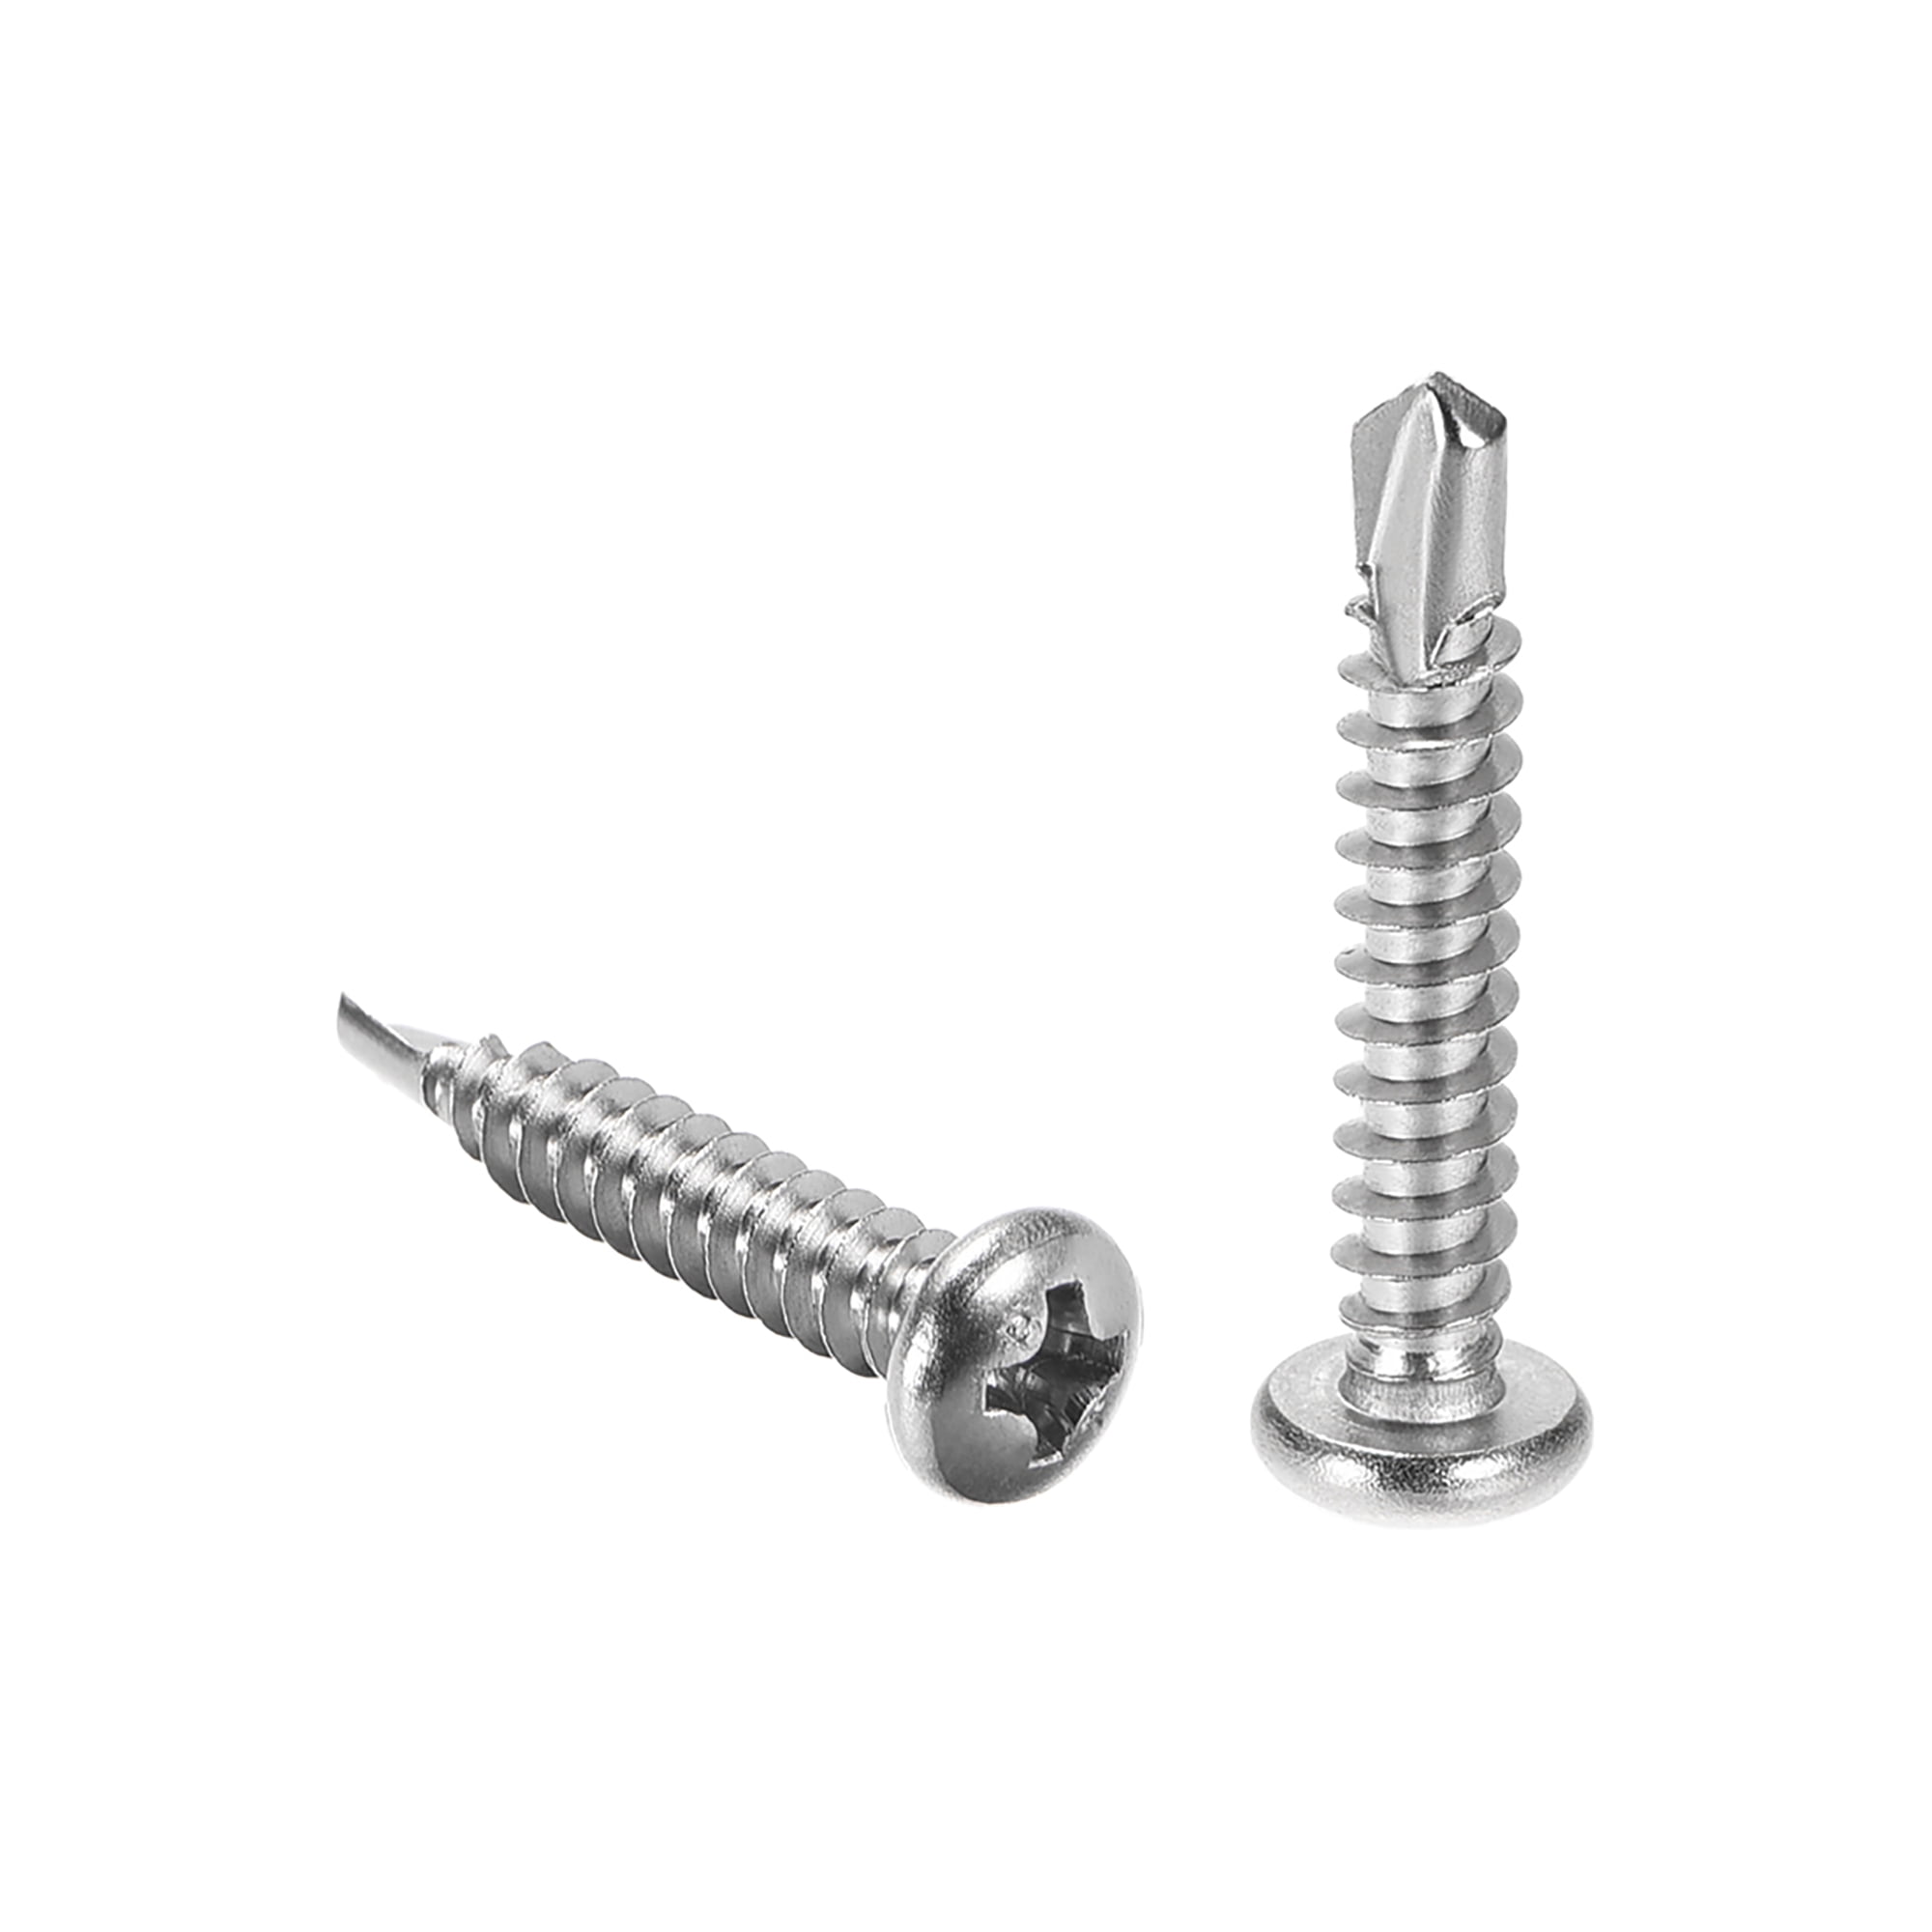 uxcell® 50pcs M2 x 6mm Stainless Steel Phillips Pan Round Head Self Tapping Screws